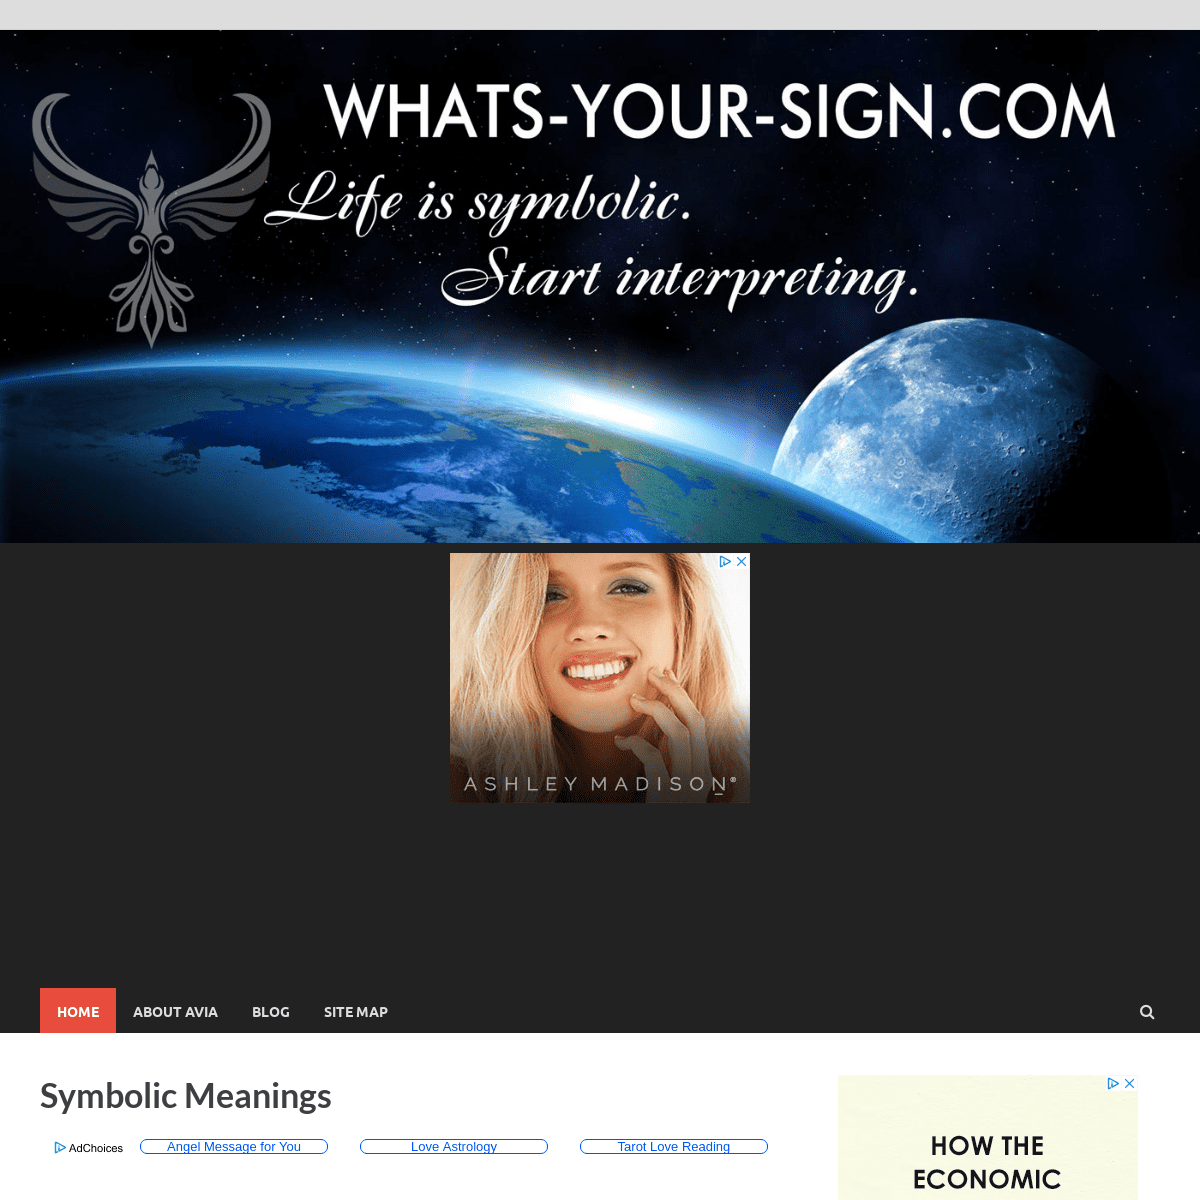 Whats-Your-Sign.com Your Guide to Symbolic Meanings of All Kinds!